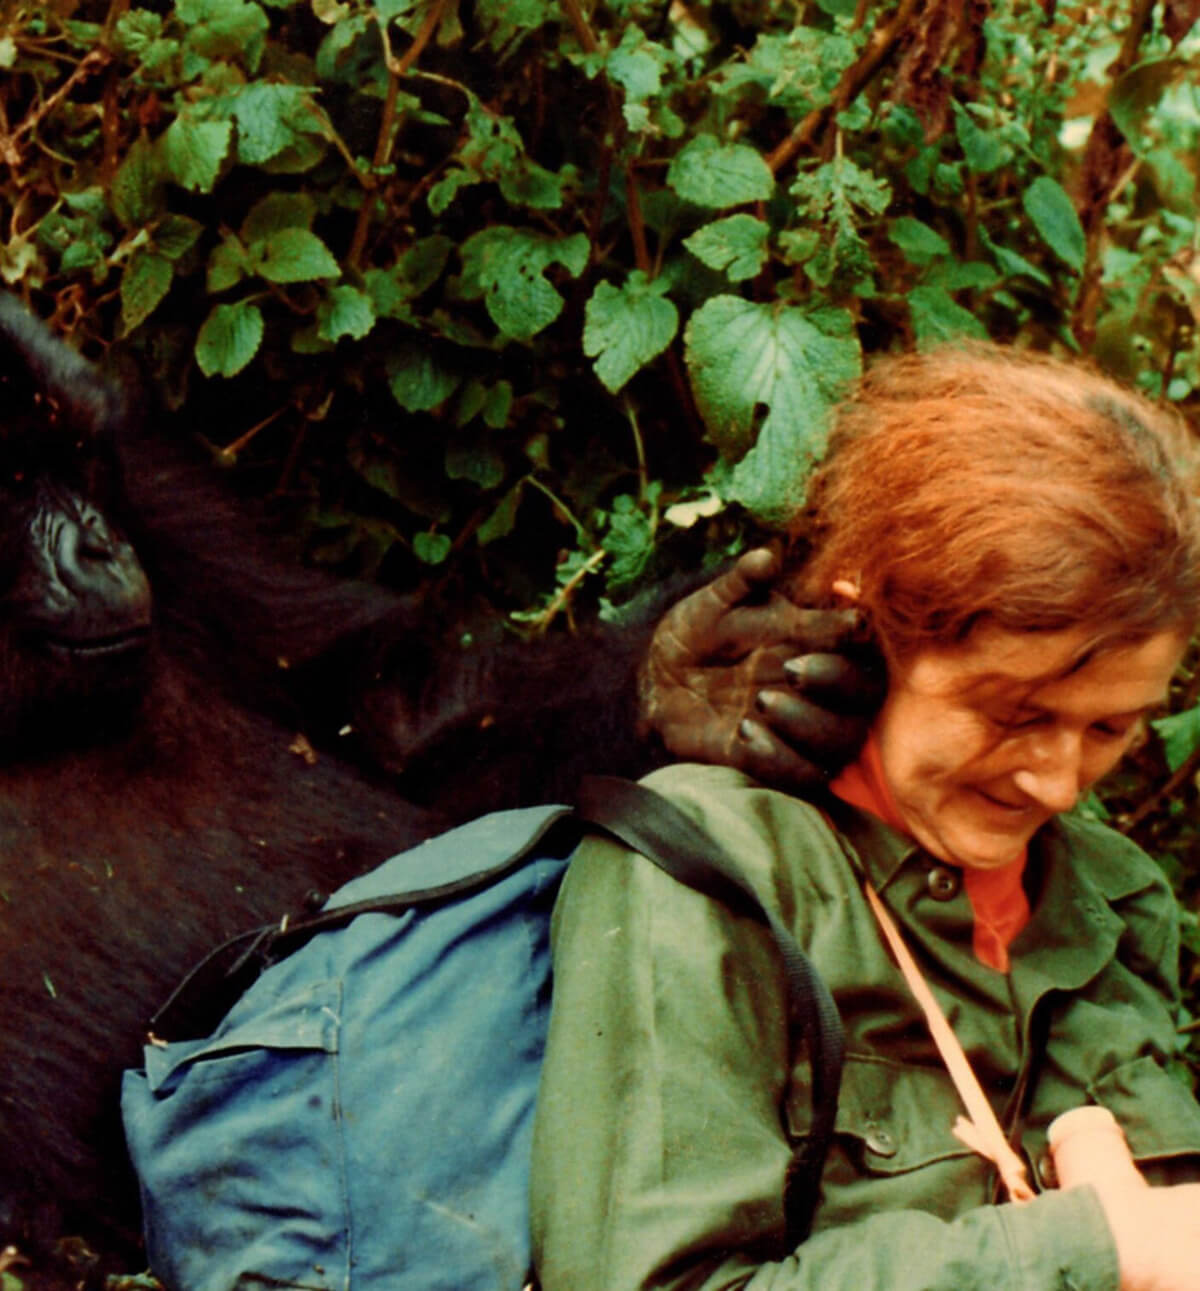 Dian Fossey with a gorilla. Image credit: Courtesy of Dian Fossey Gorilla Fund